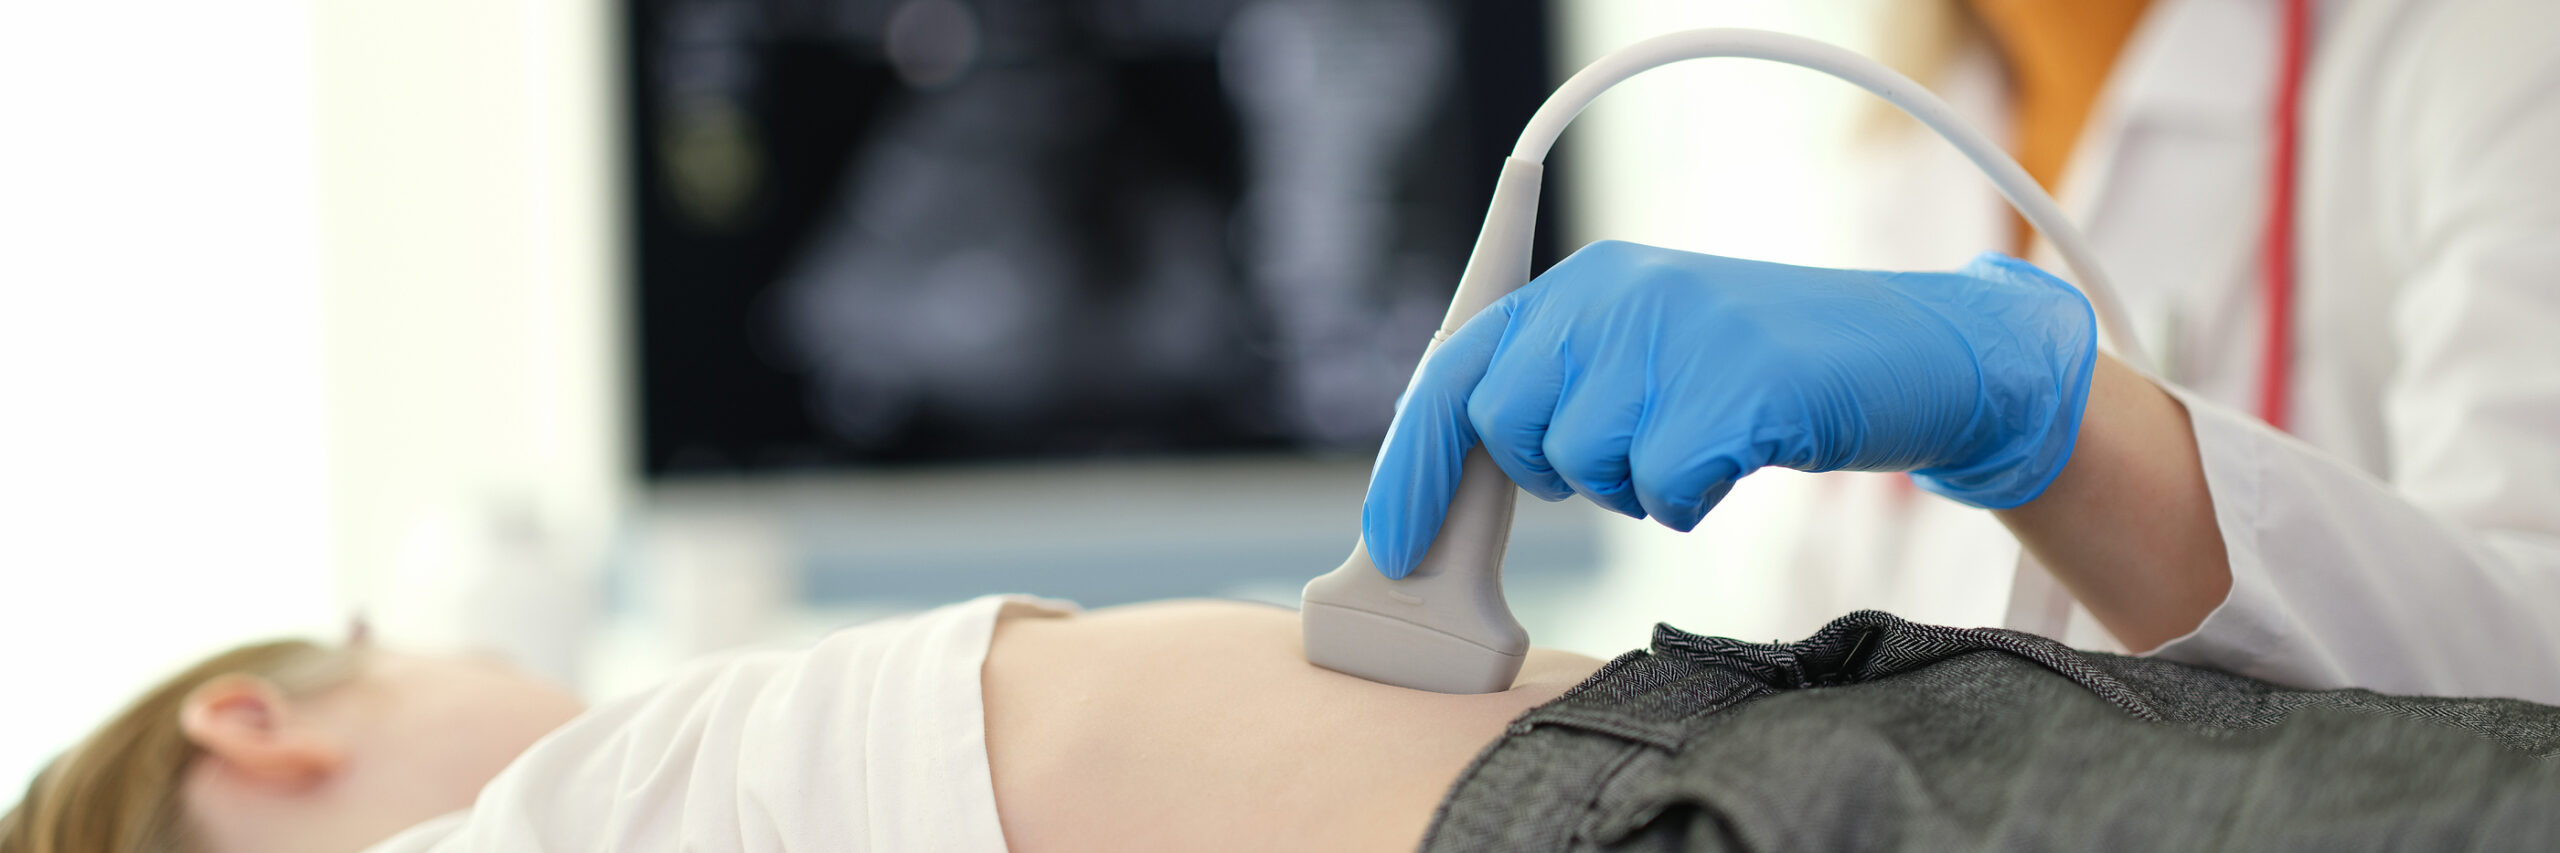 reasons to have ultrasound before an abortion